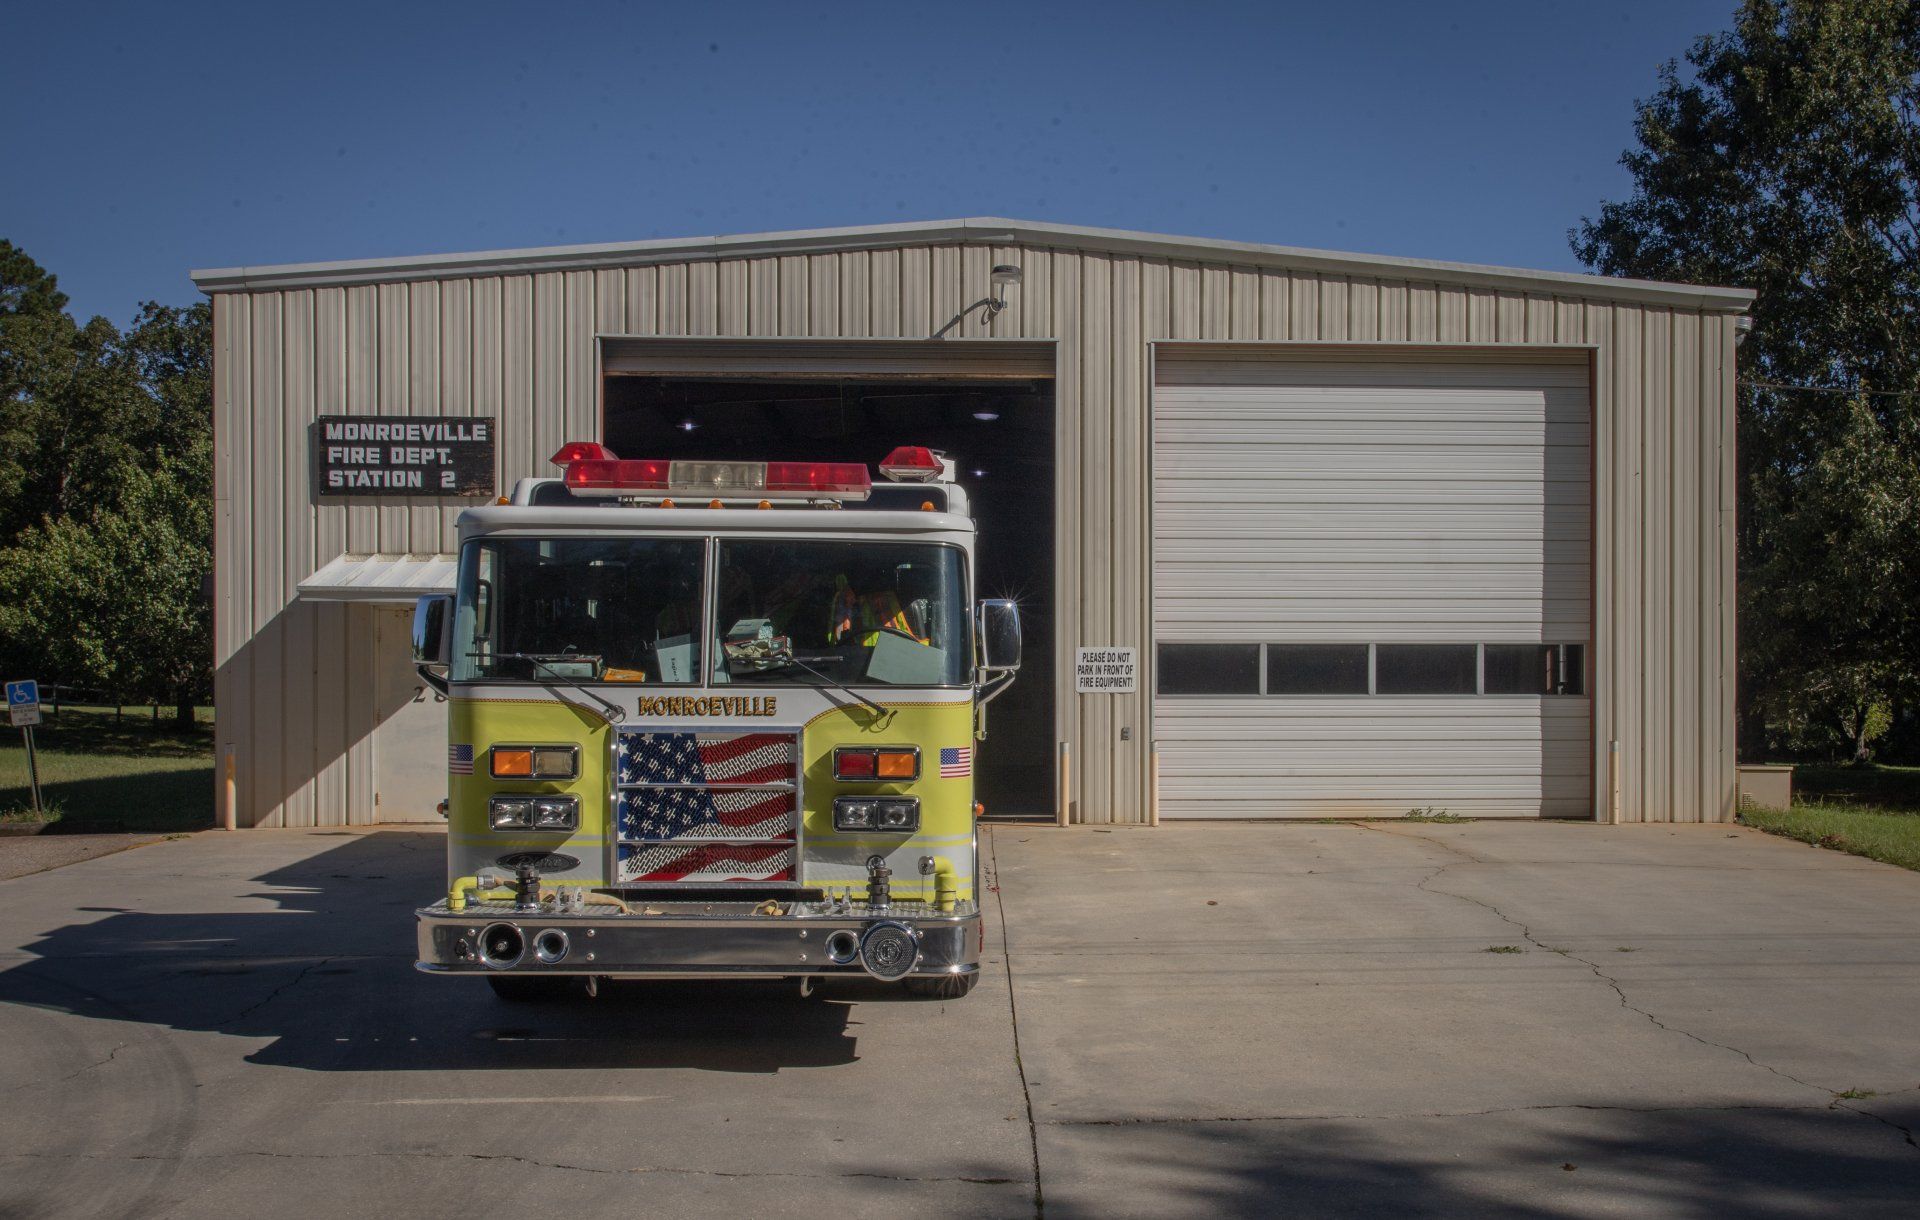 Monroeville Fire Rescue Station 2